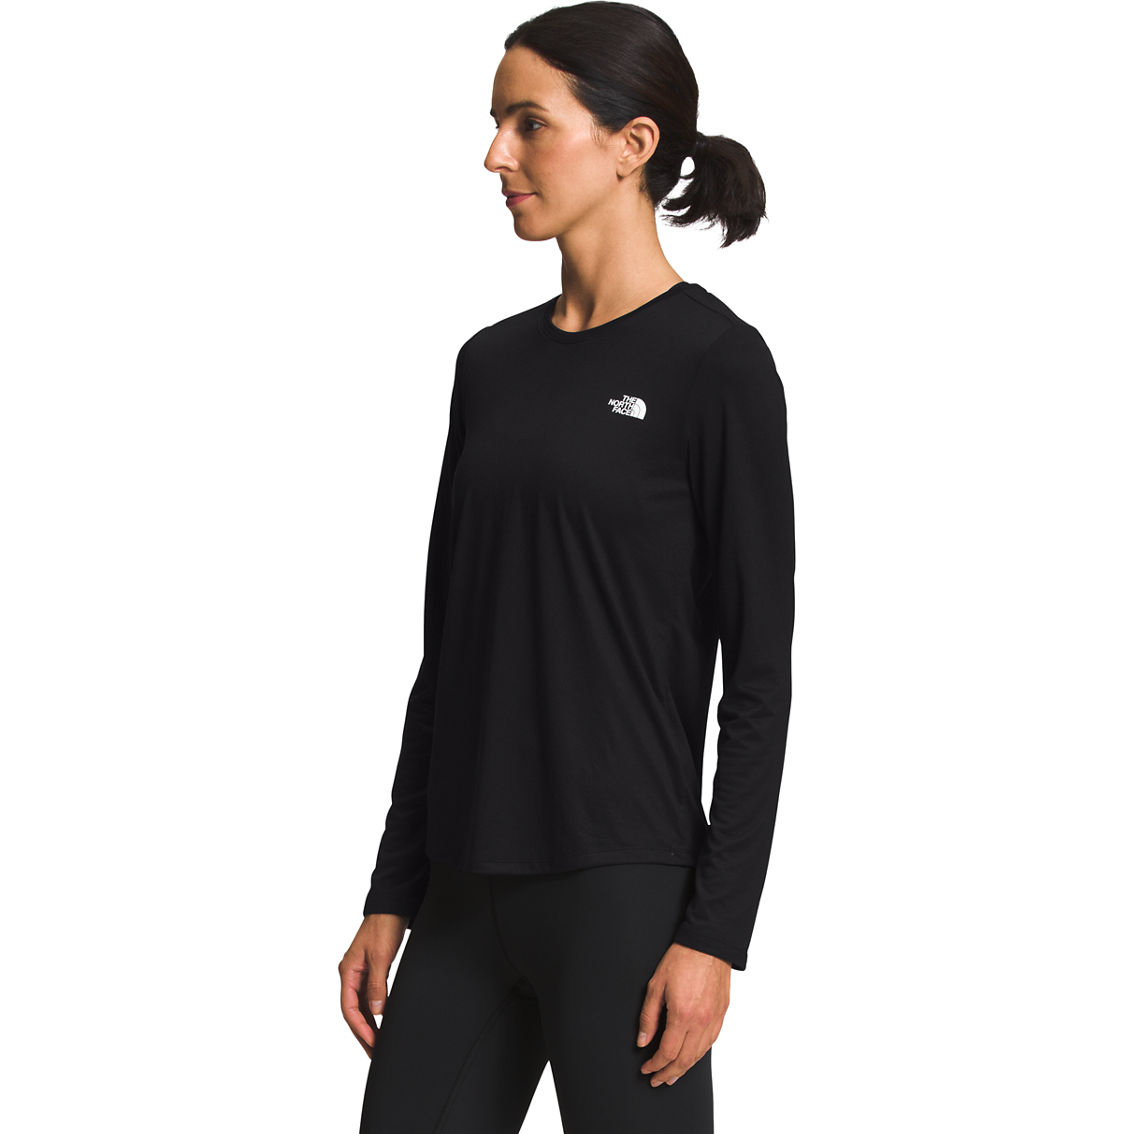 The North Face Elevation Shirt - Image 7 of 7